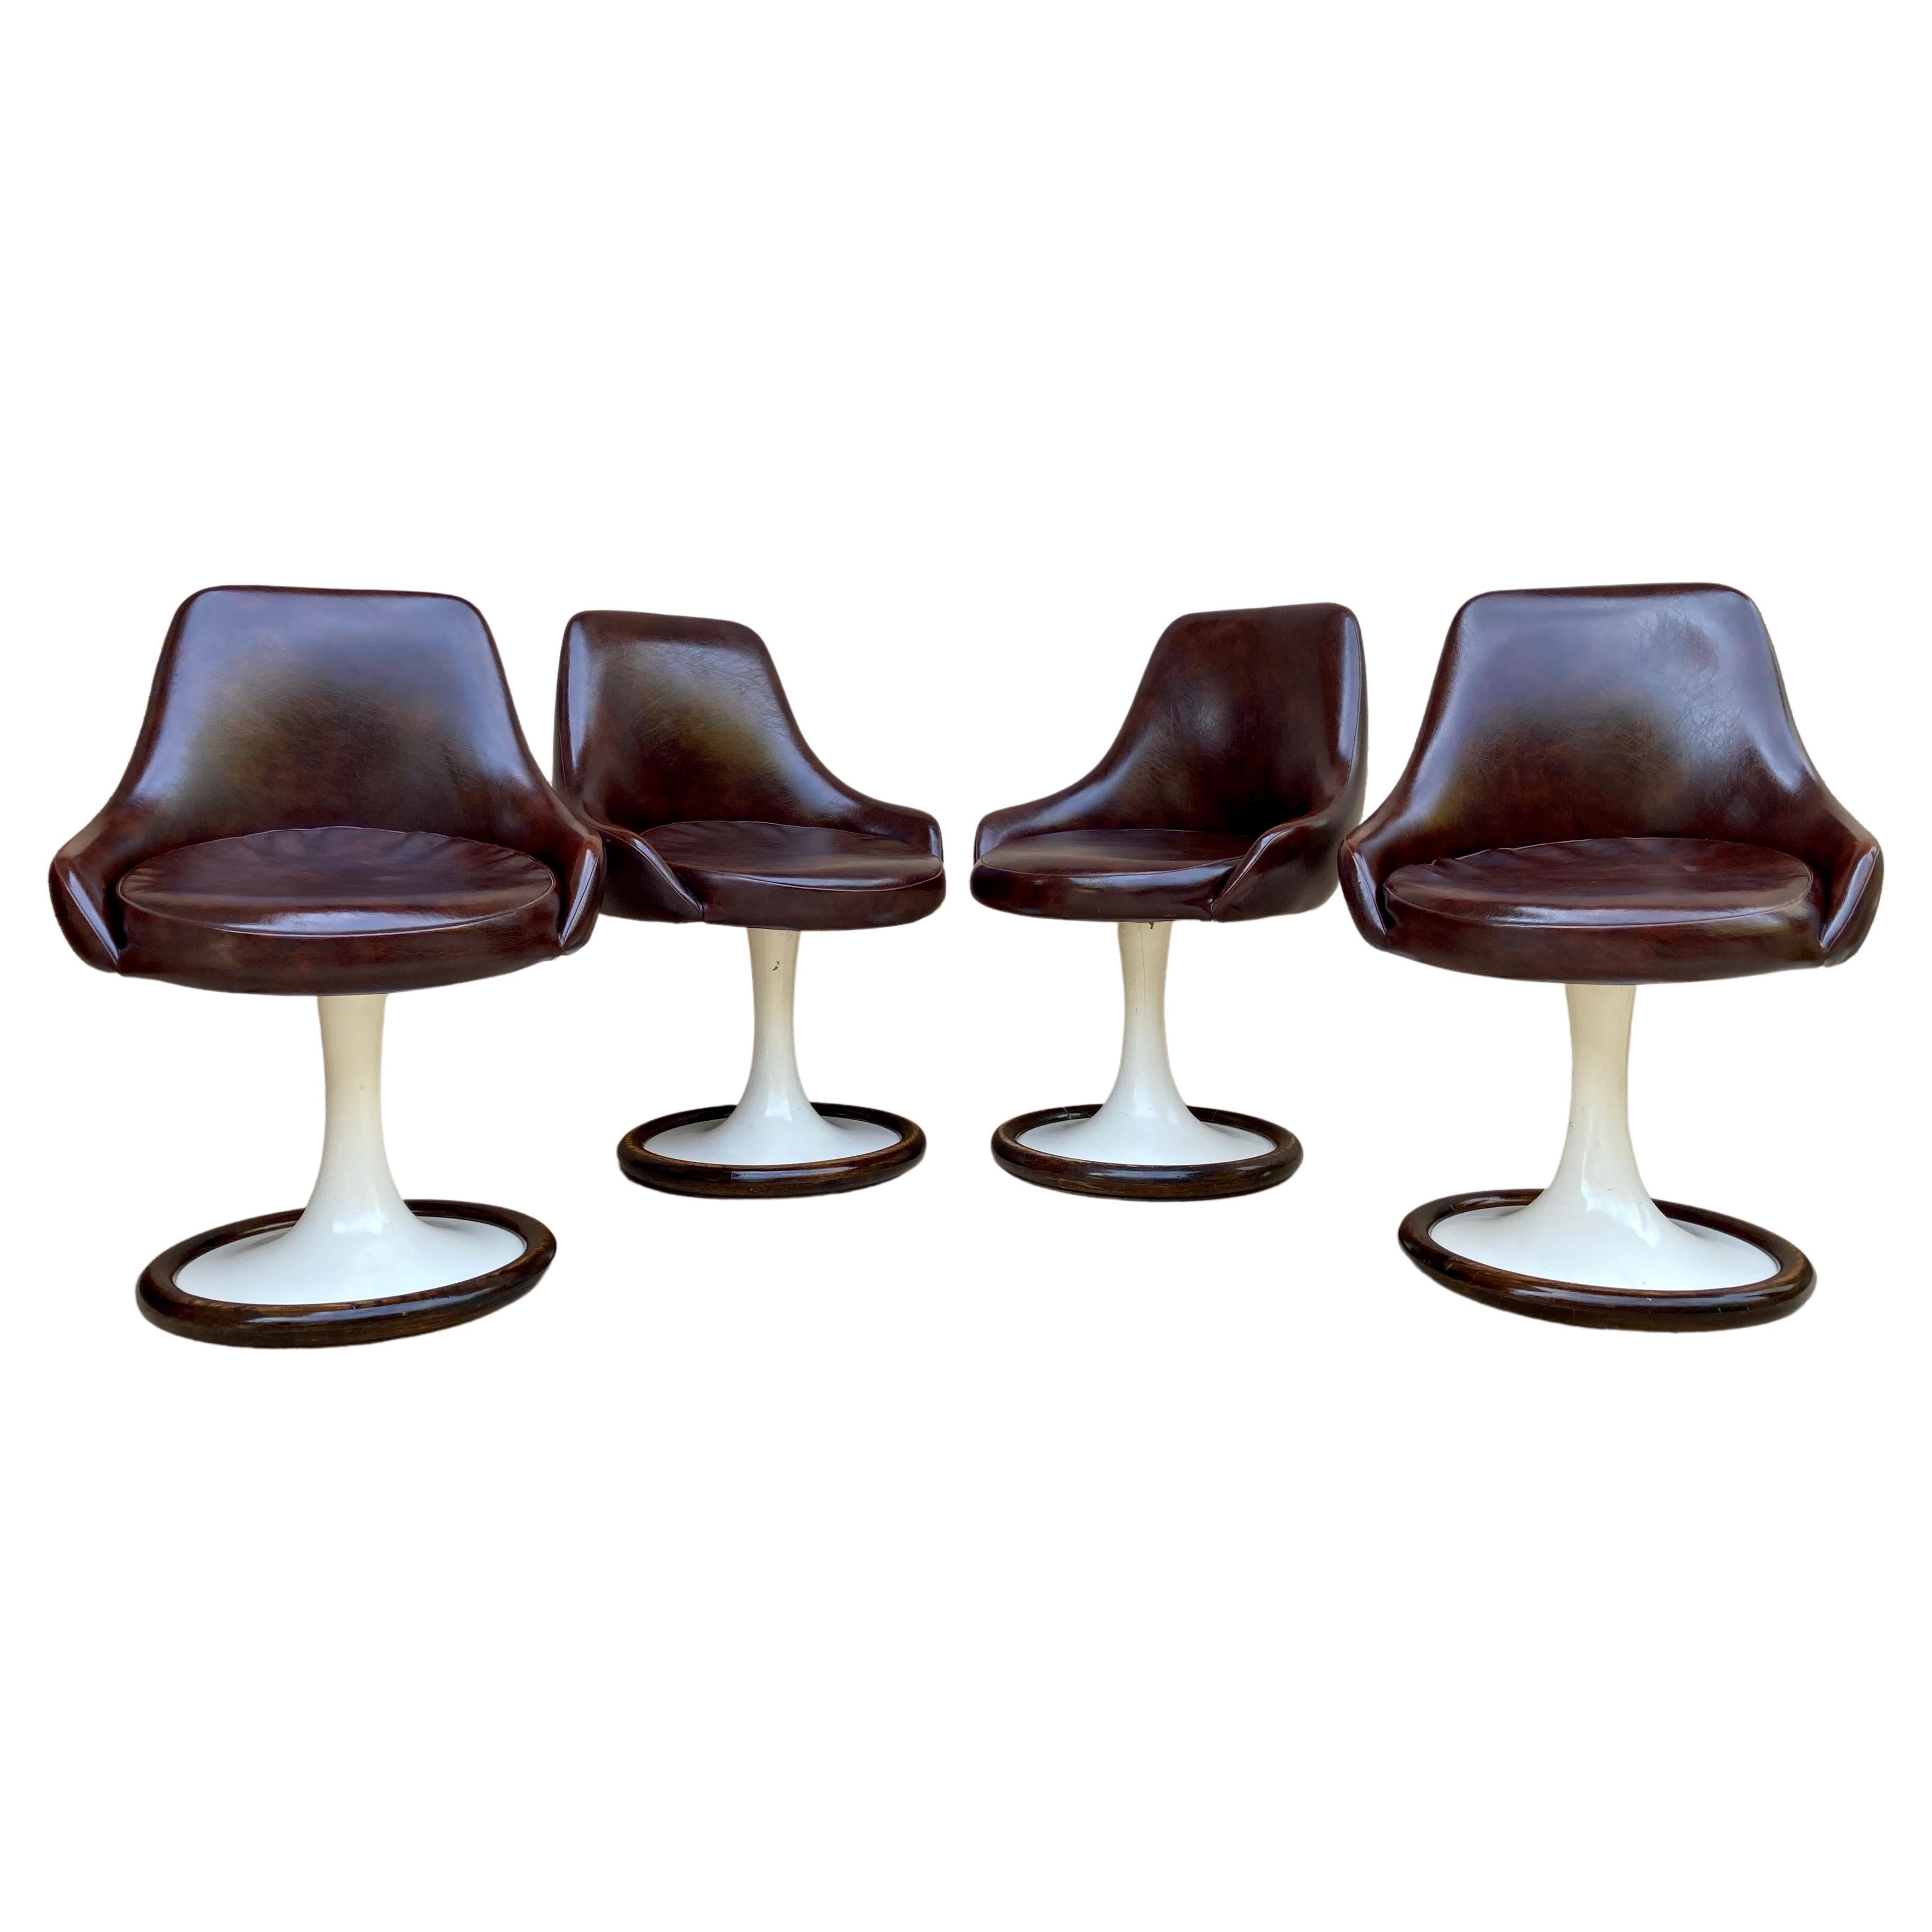 Set of Space Age Swivel Chairs in Original Brown Leather For Sale